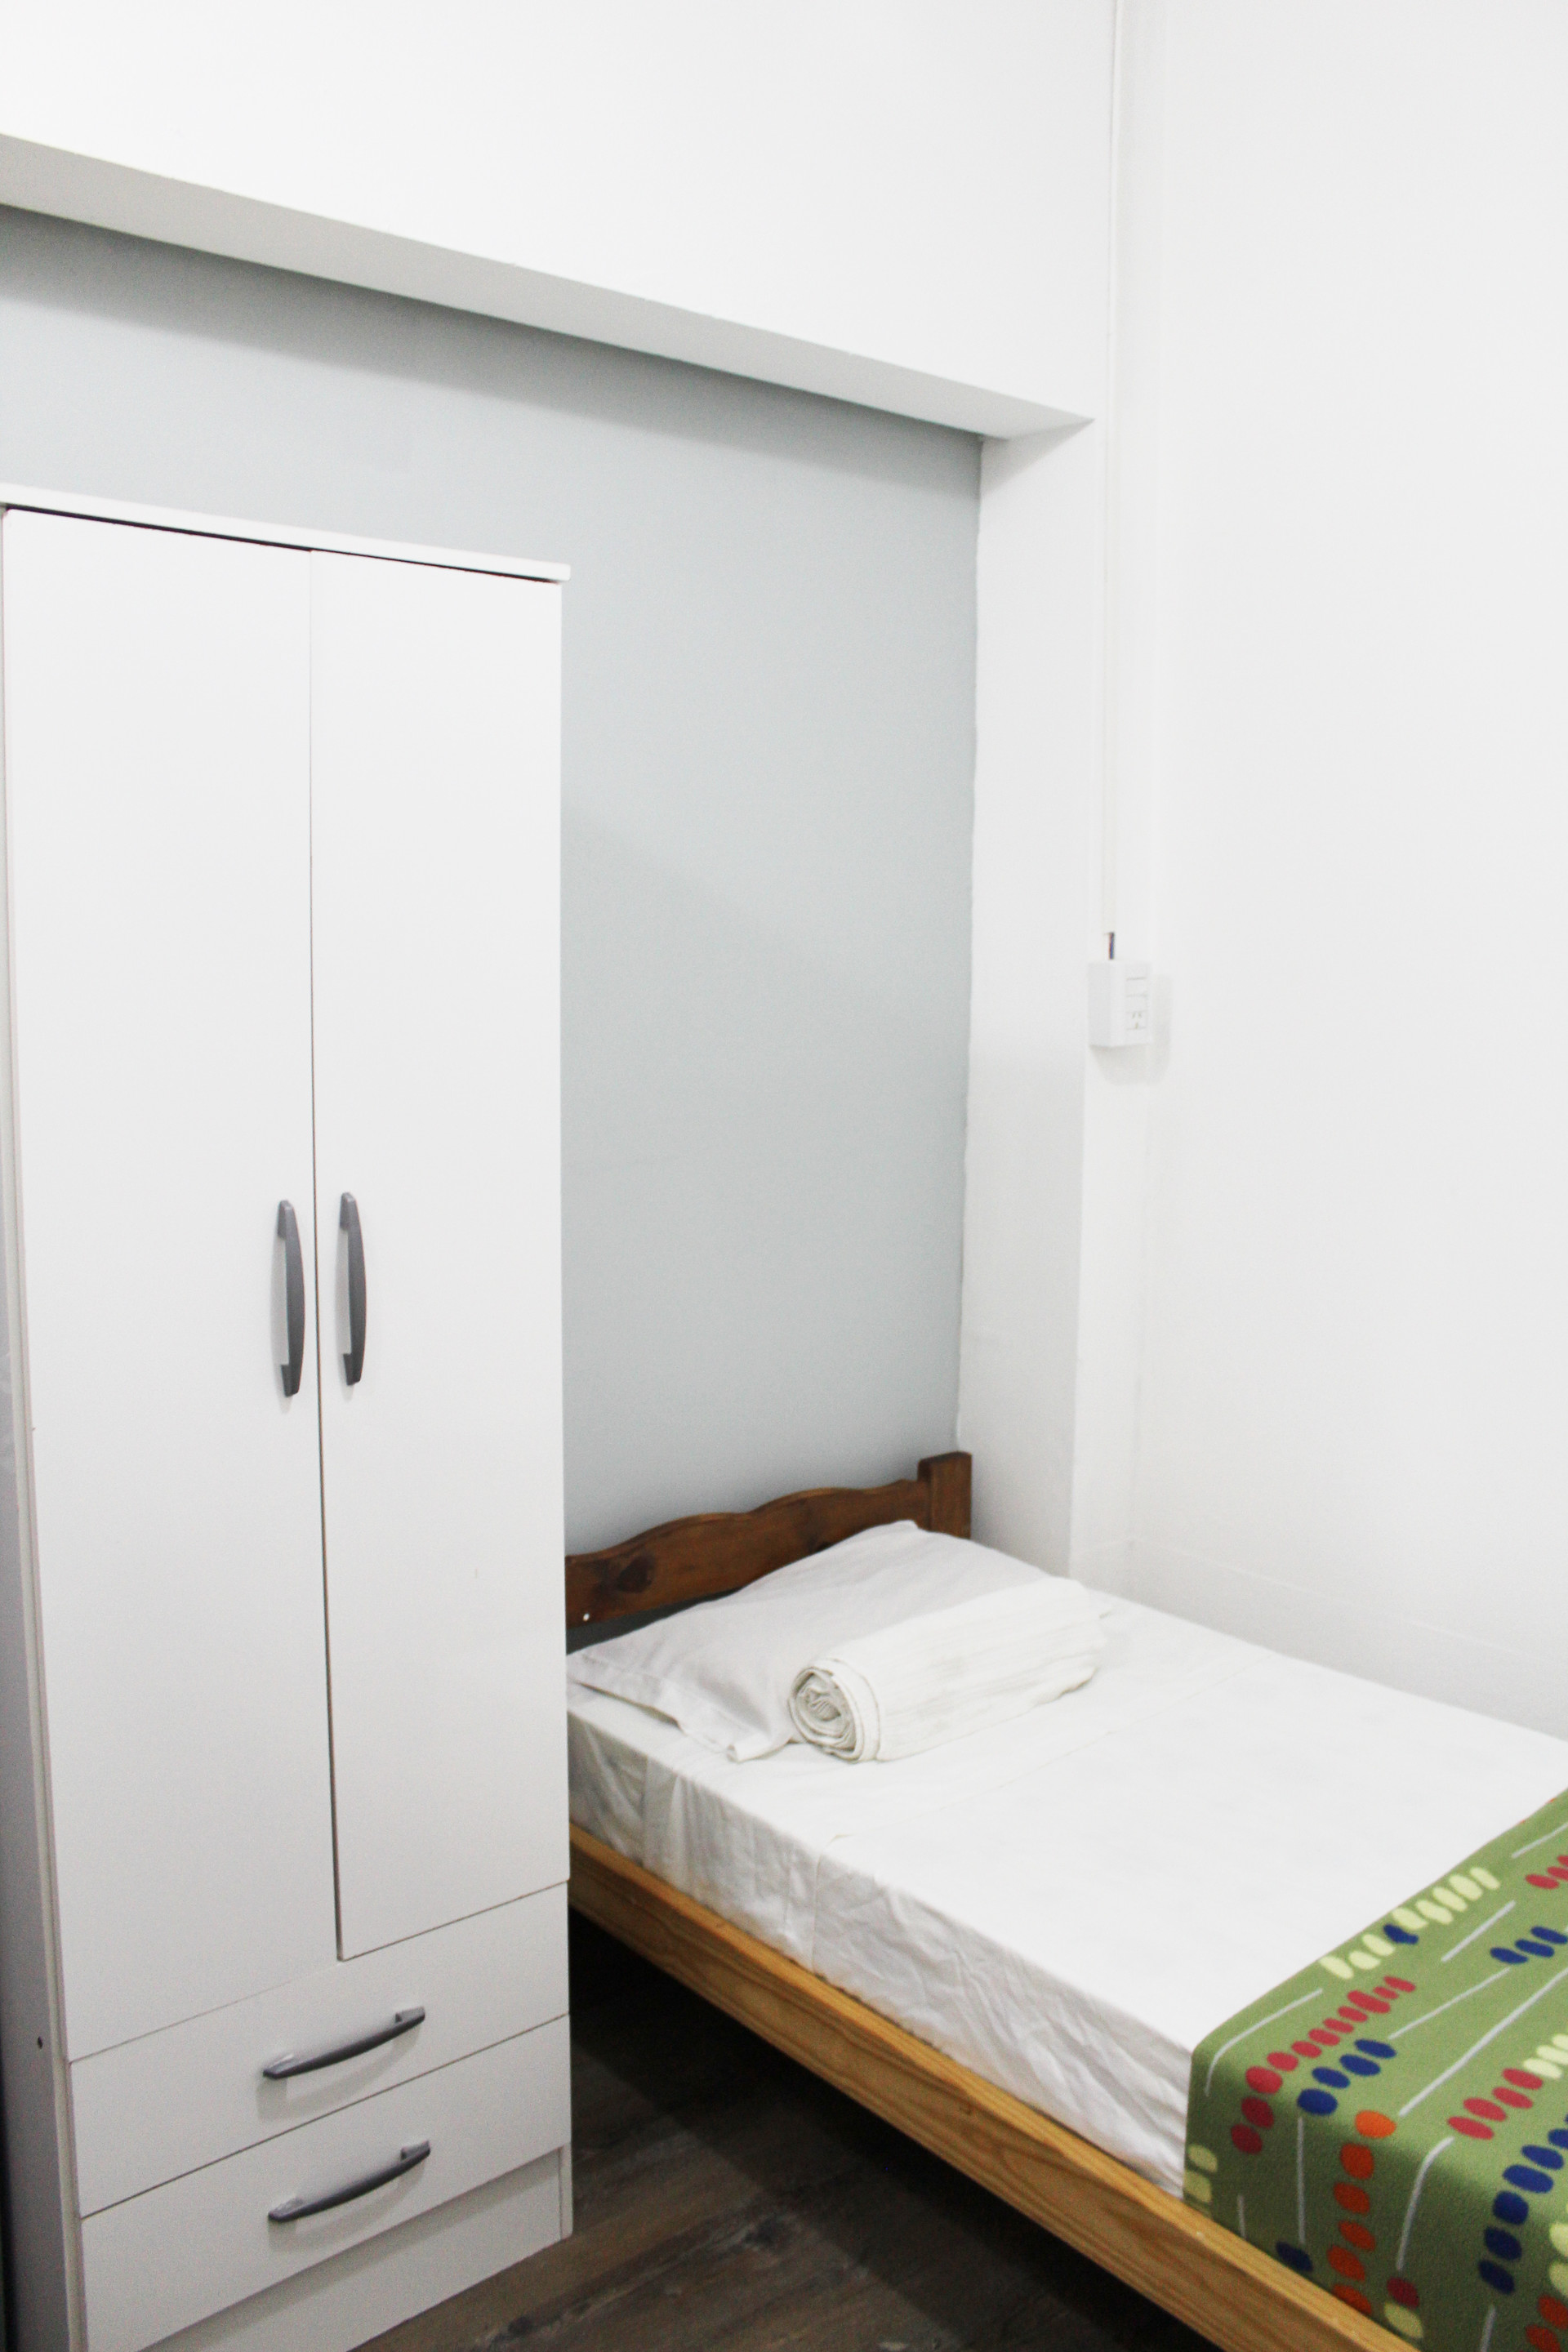 Room For Rent In 14 Bedroom Apartment In Buenos Aires With Internet And With Cleaning Service